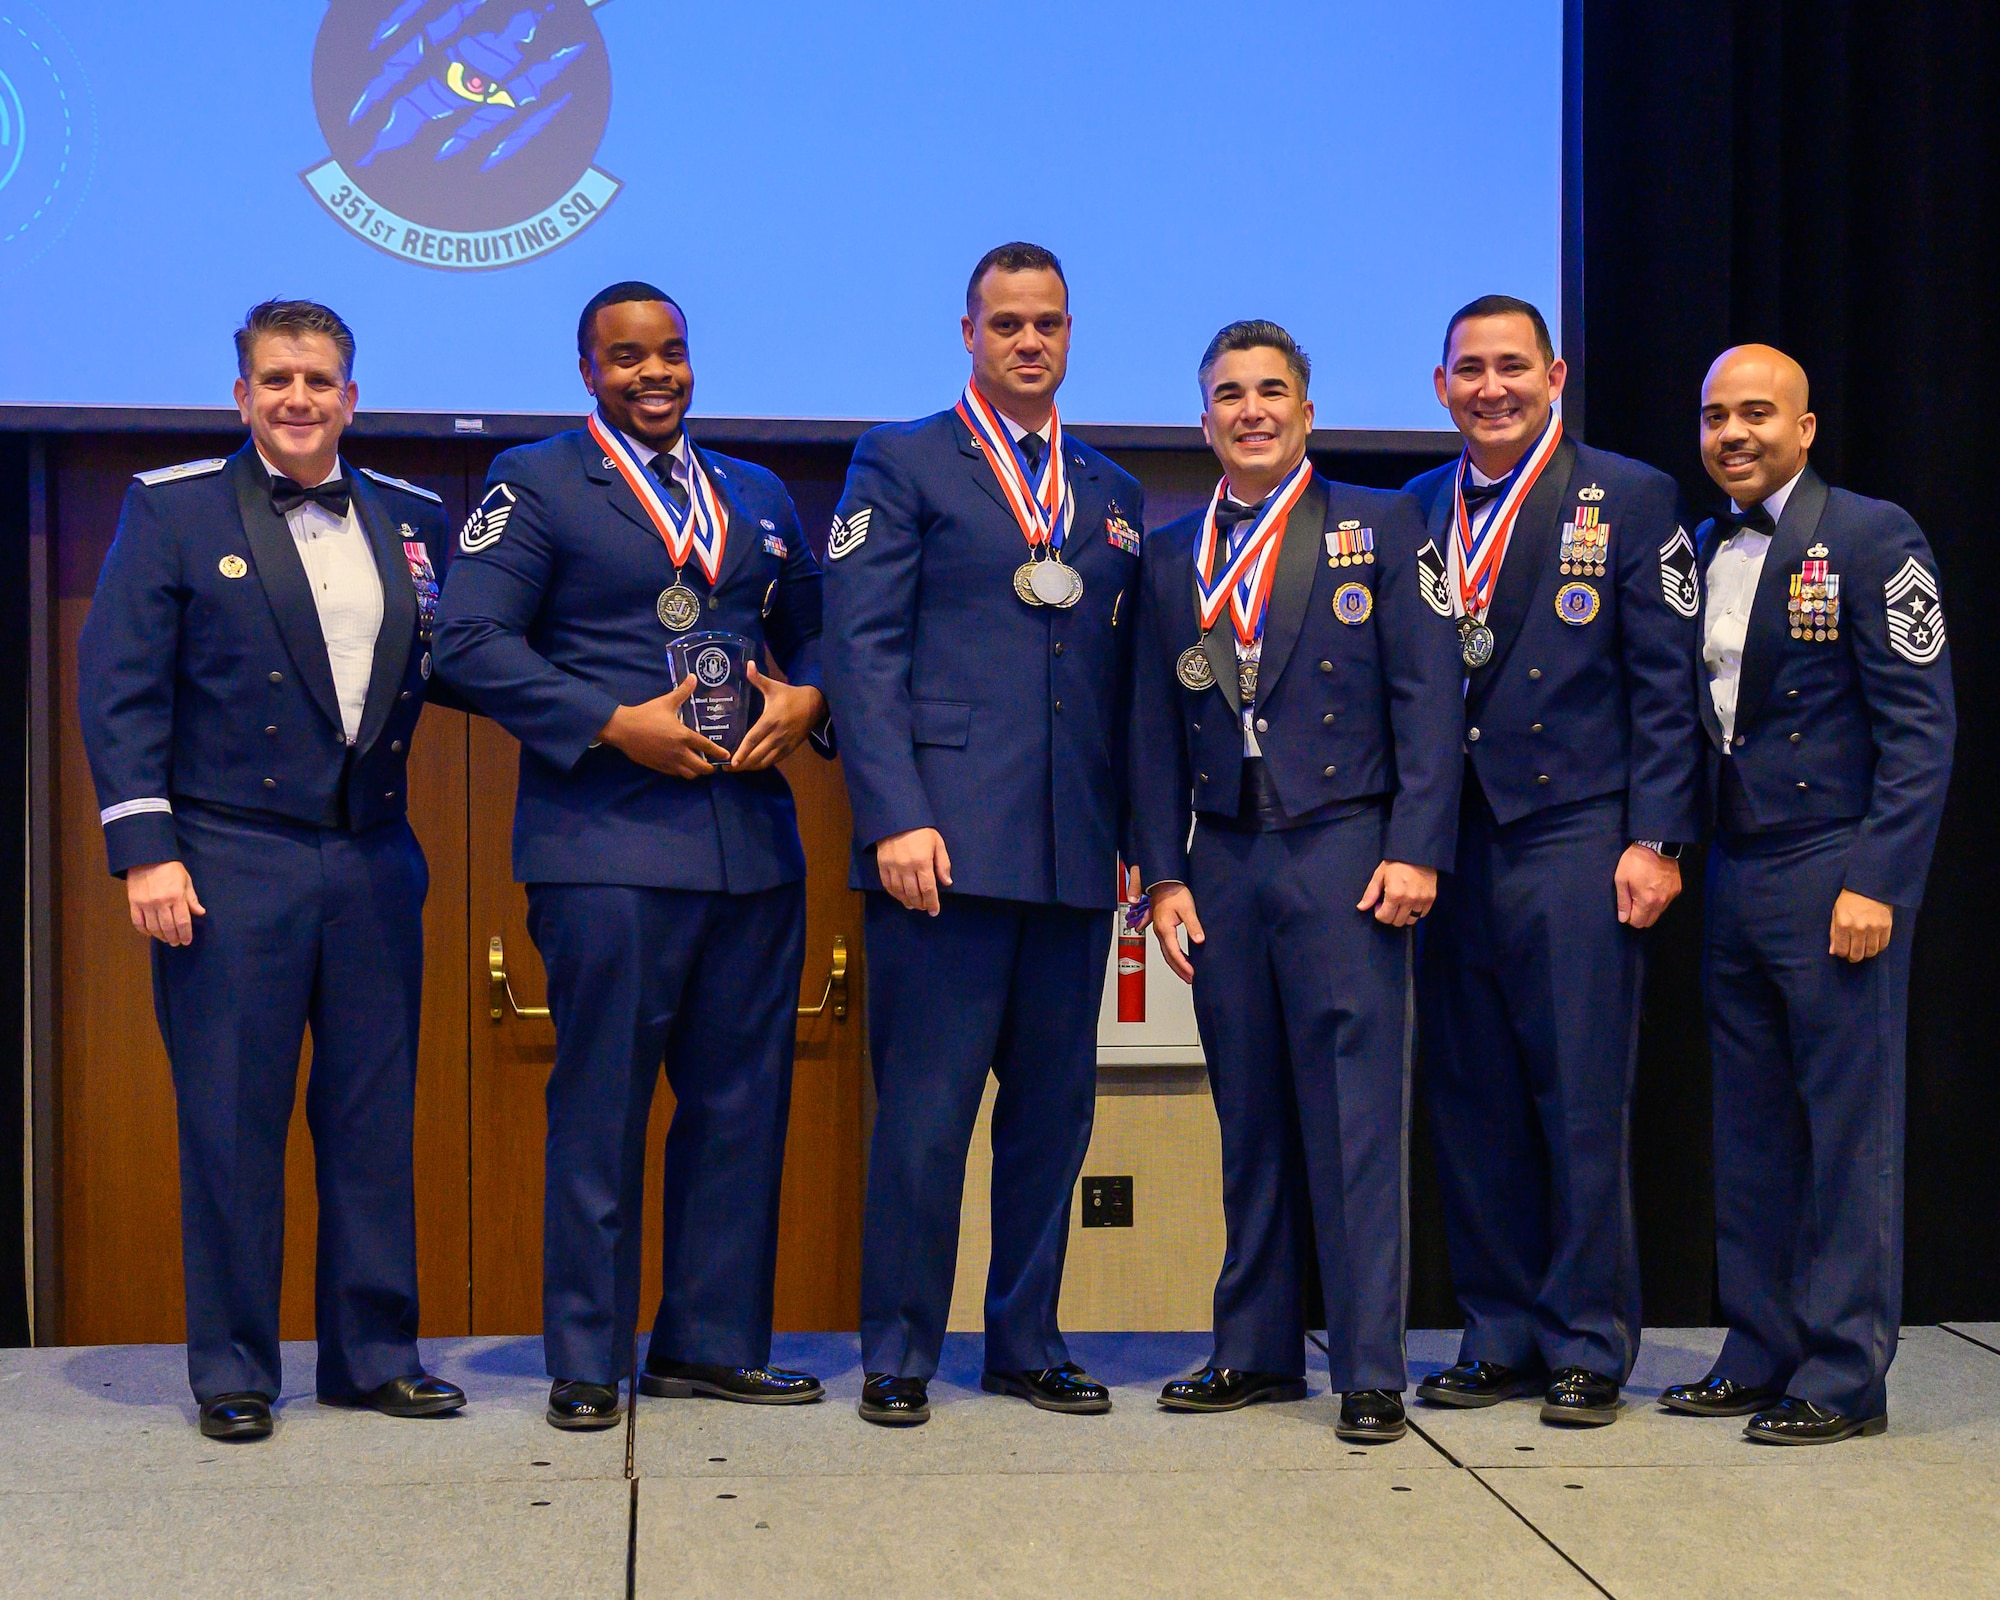 Brig Gen Christopher Amrhein and AFRC Command Chief Israel Nuñez present the Most Improved Flight award to MSgt Erick Williams, TSgt Bryant Guardia, MSgt Jaime Gomez Lopez, and SMSgt Chase Kaiuwailani during the 367 Recruiting Group Awards ceremony. This prestigious award recognizes the team's exemplary achievement of an 83% increase in recruitments in Fiscal Year 23, underscoring their significant contribution to the Air Force Reserve Command's recruitment efforts. (U.S. Air Force photo by Master Sgt. Bobby Pilch)